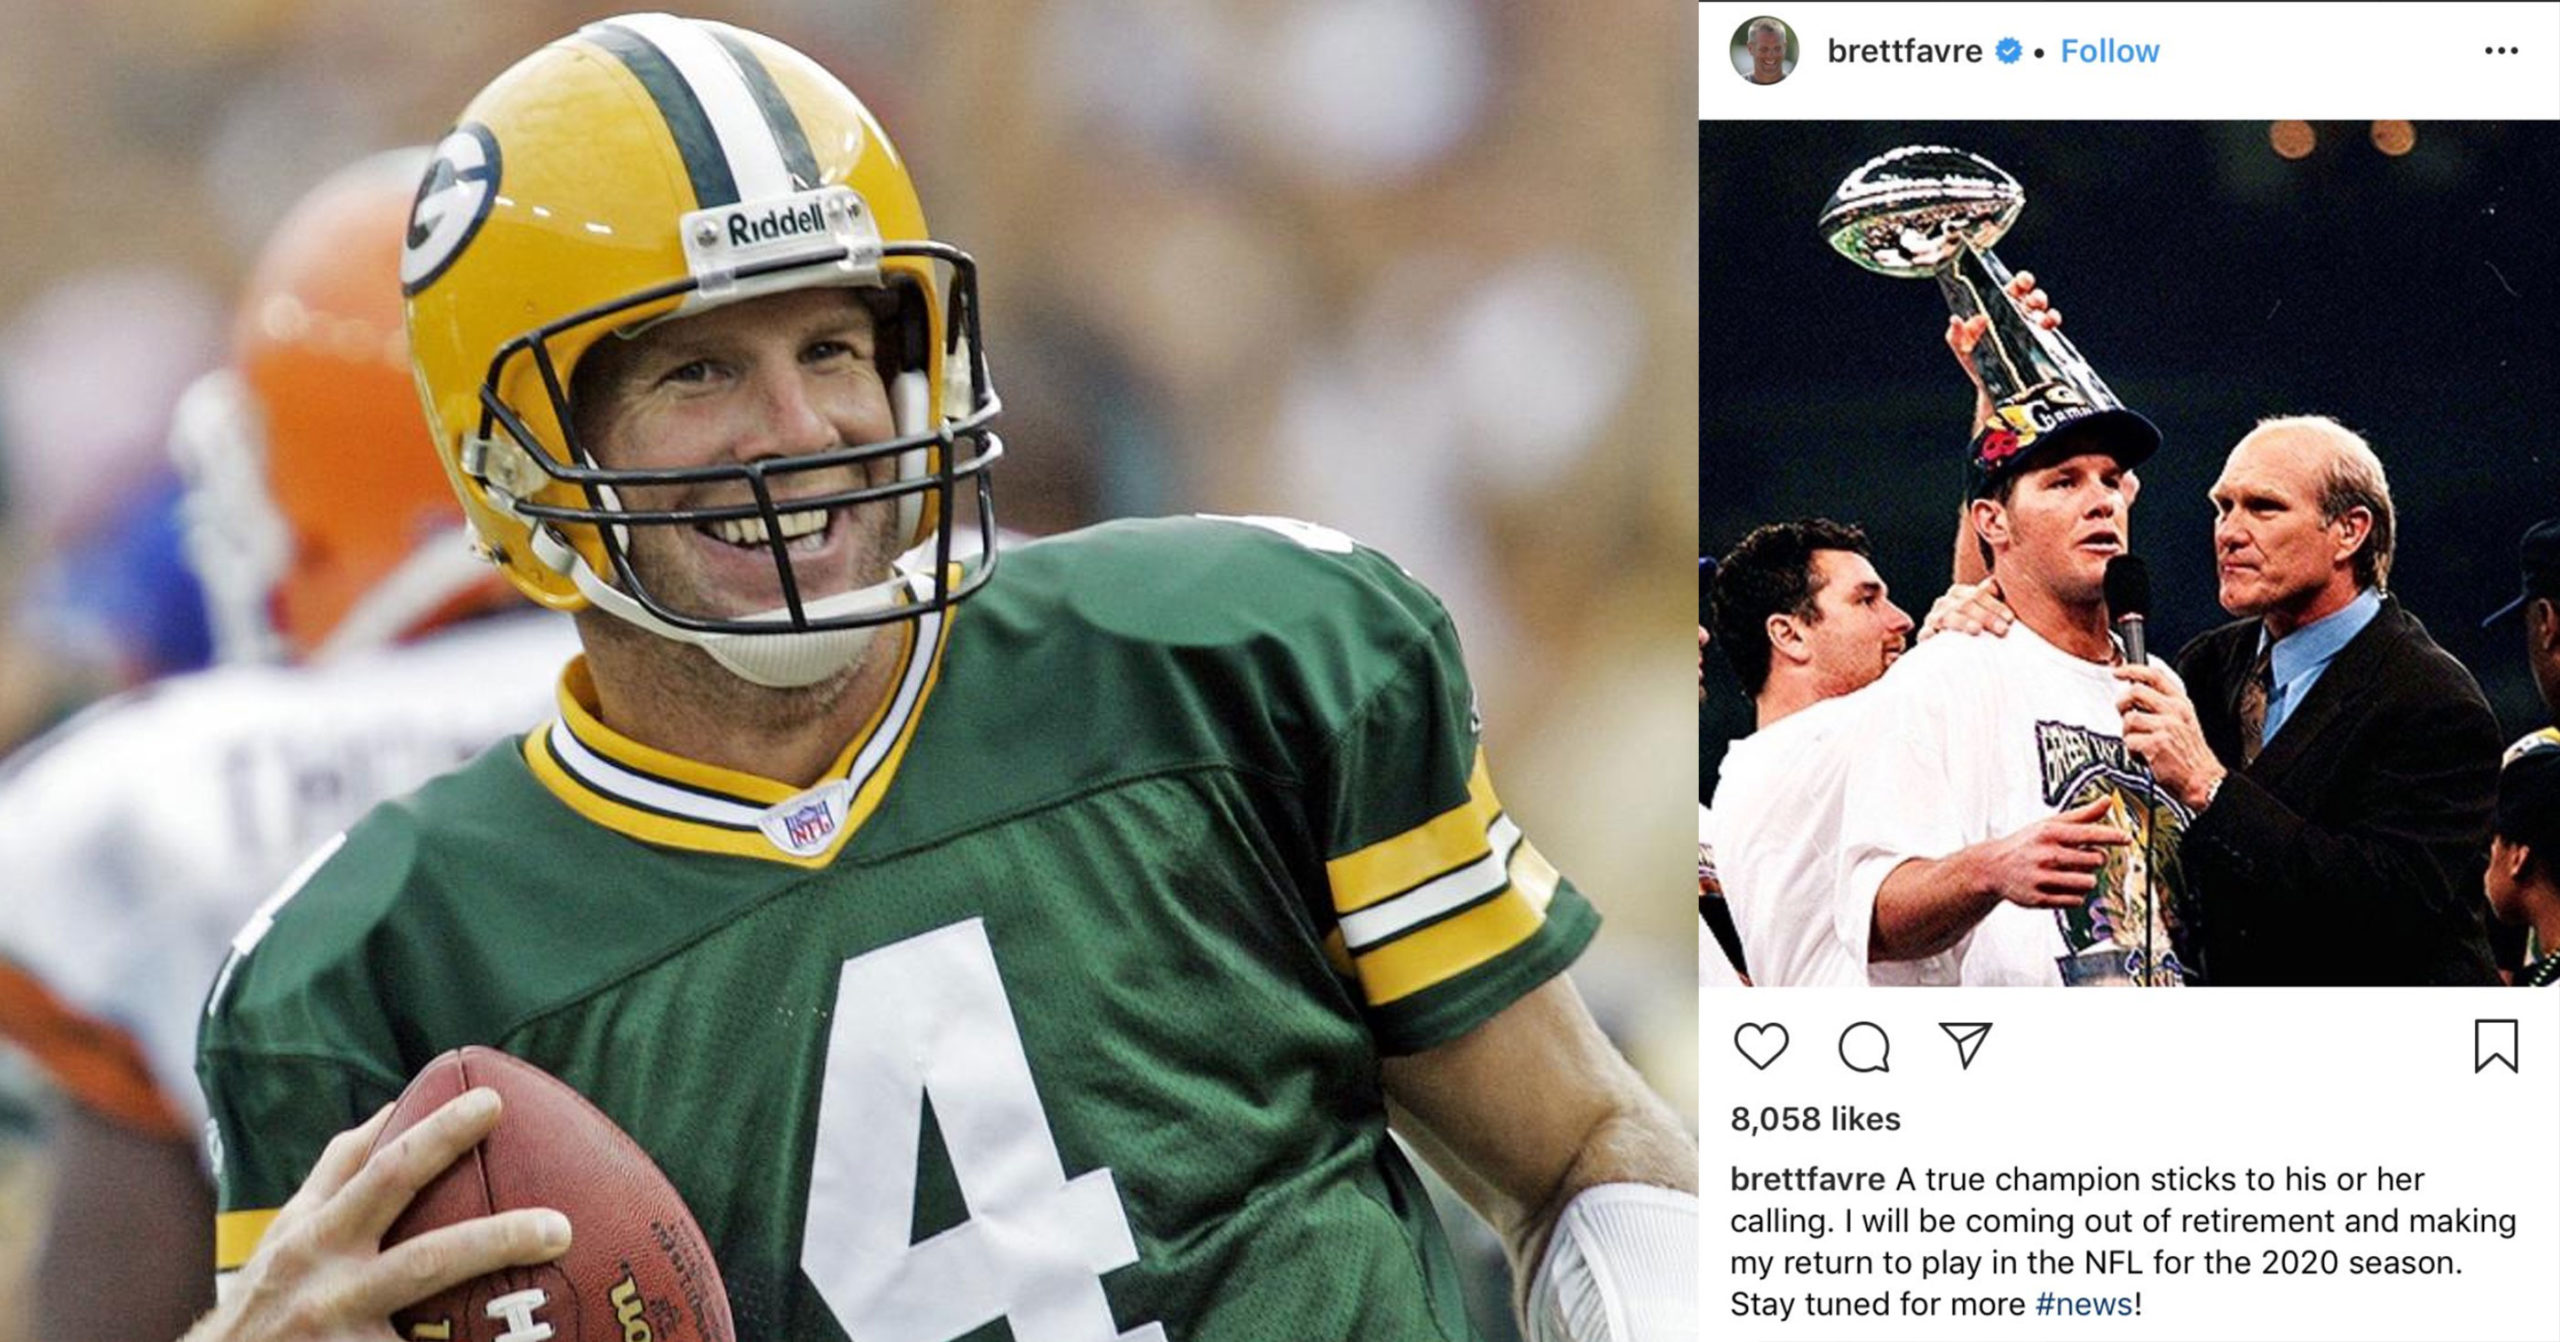 Brett Favre Announces On Instagram That He's Coming Out Of Retirement.